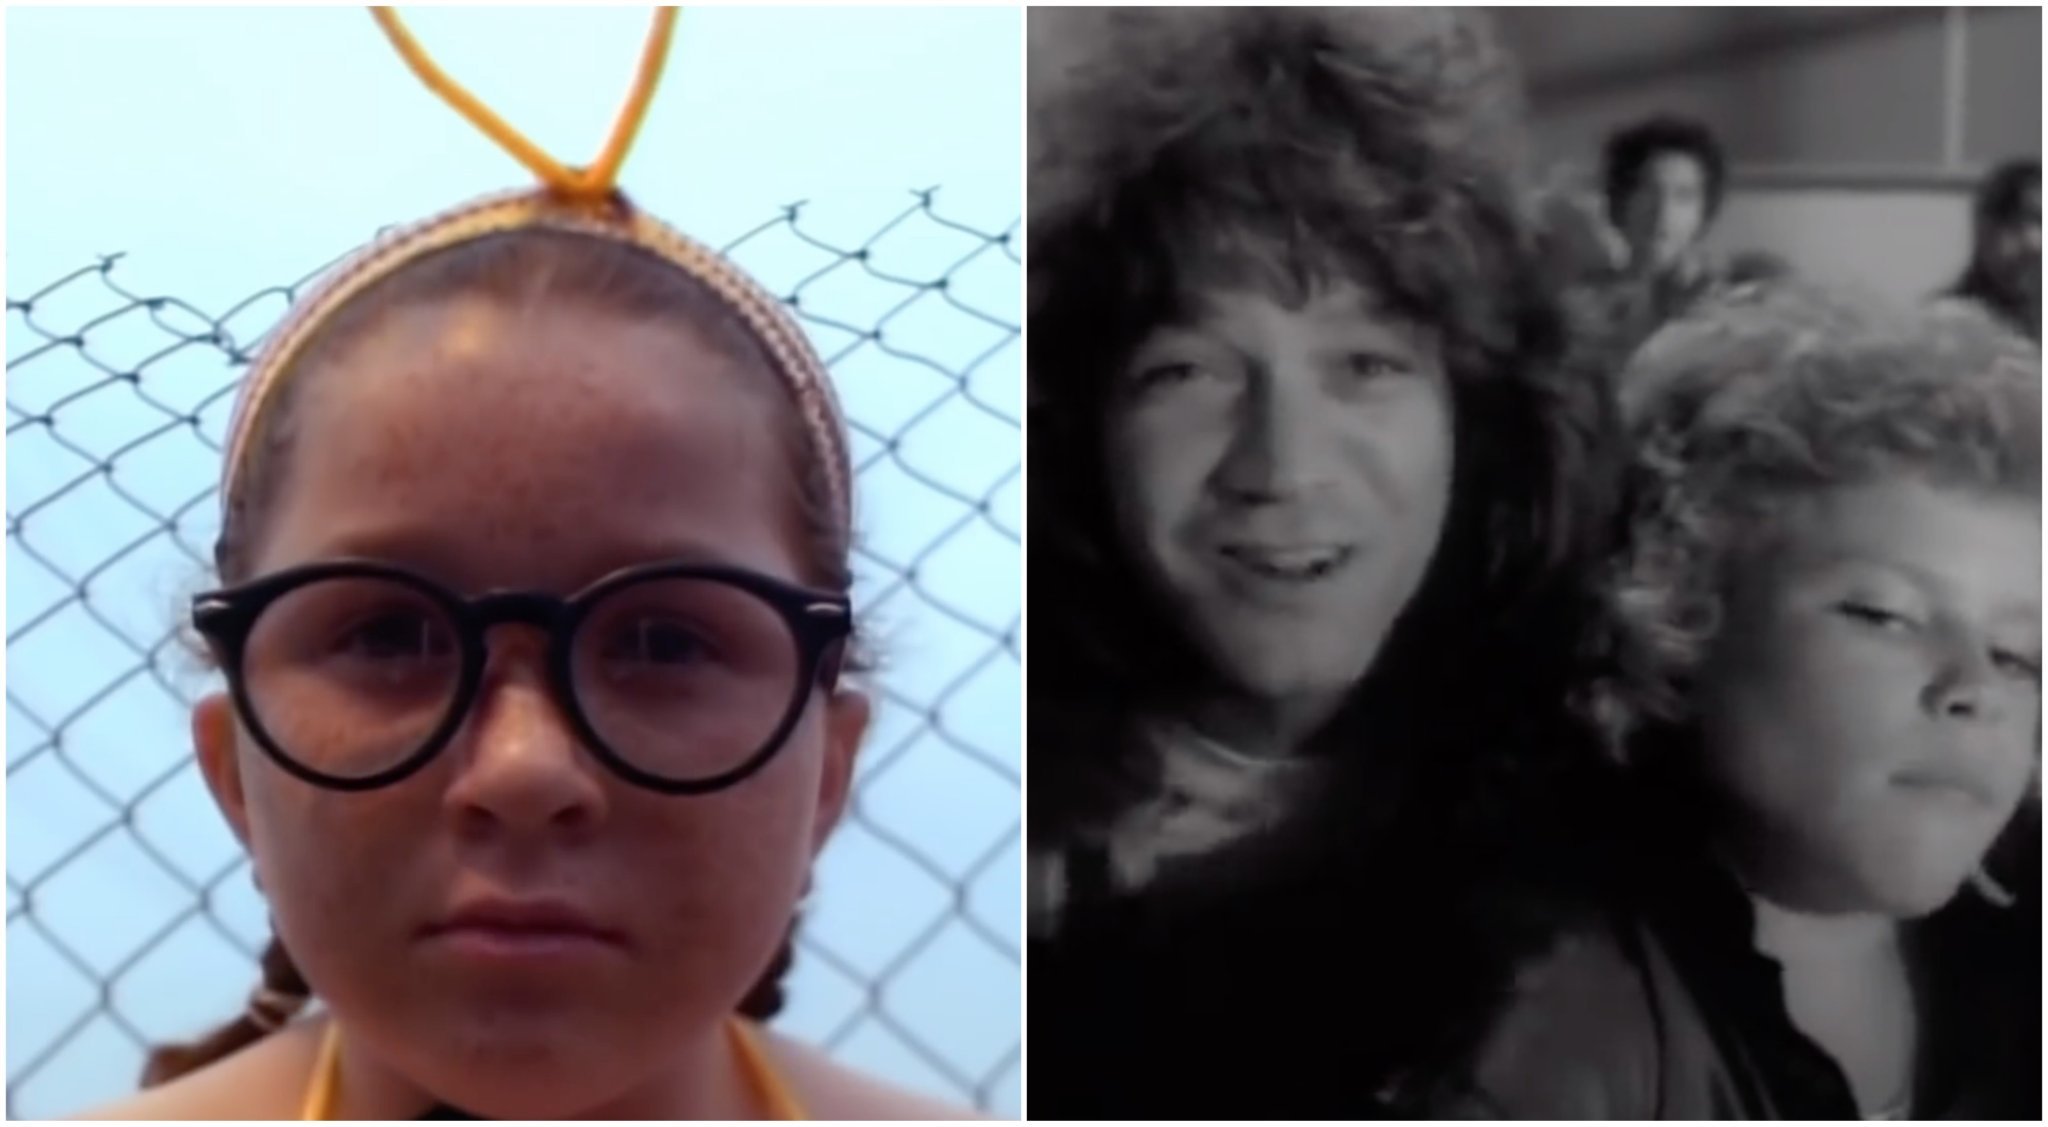 Here's what the Blind Melon bee girl is up to now